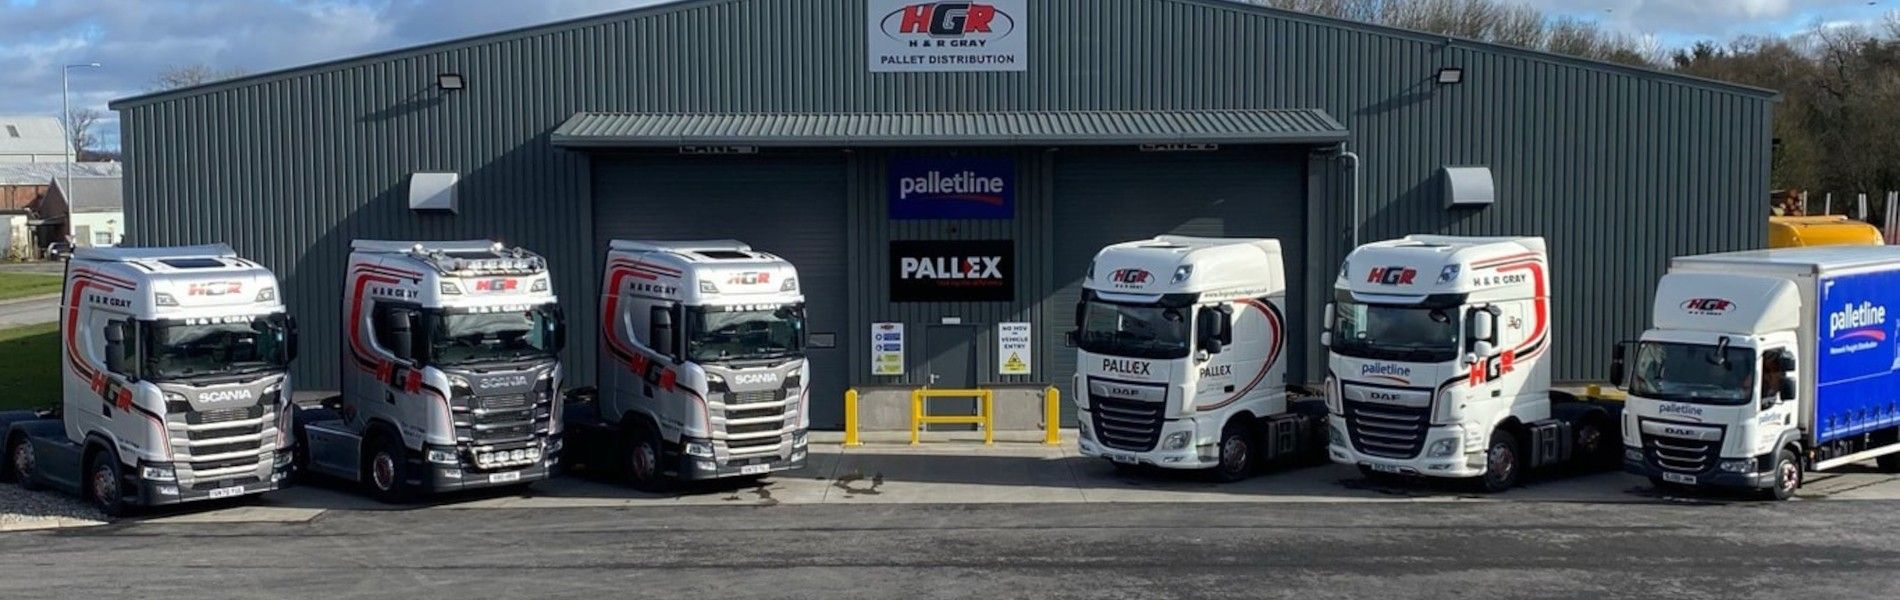 6 H & R Gray Lorries outside the warehouse